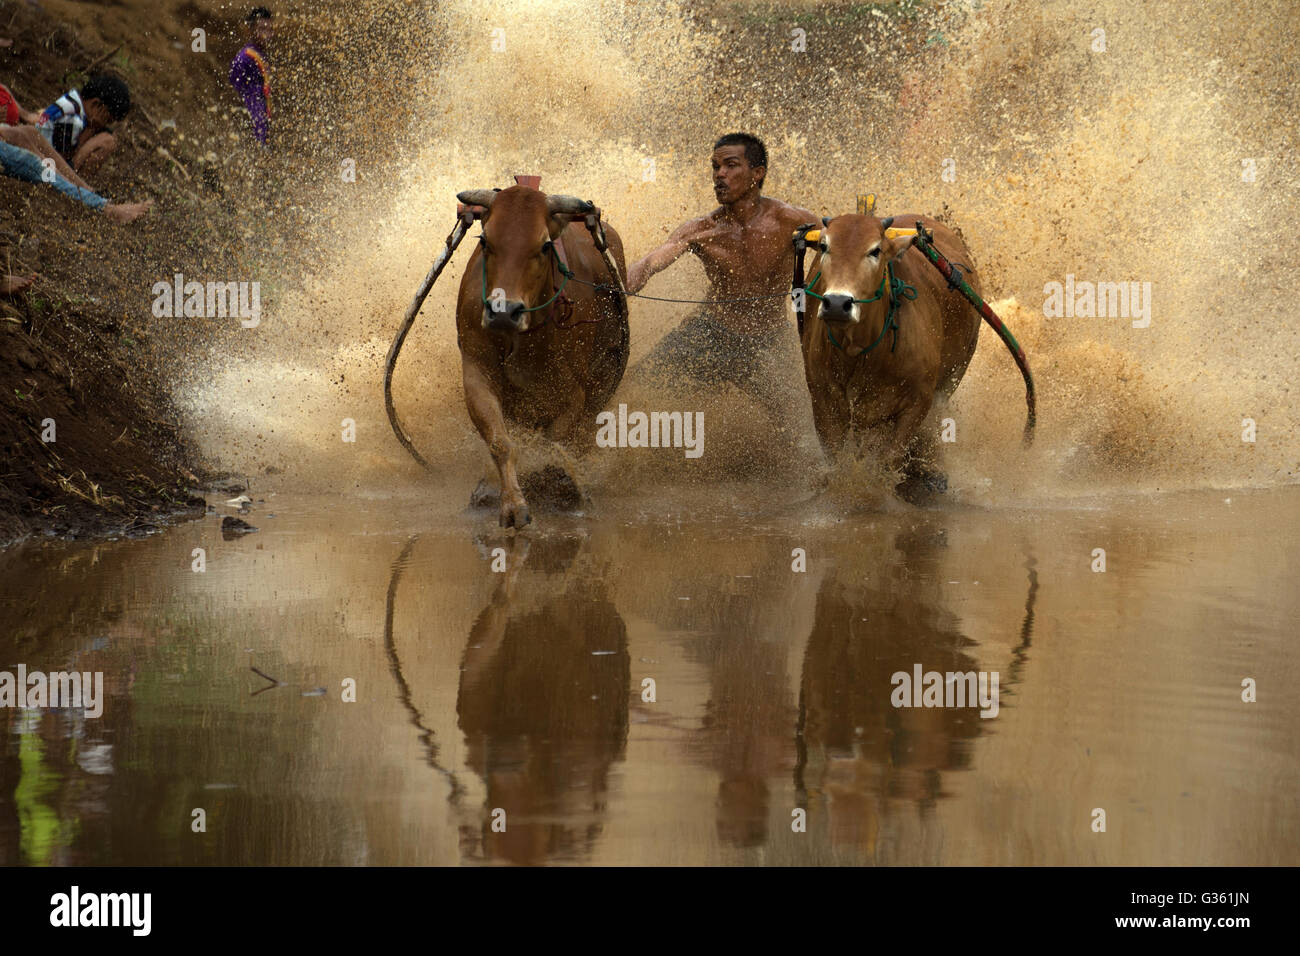 A jockey controlling his cow during the action of Pacu Jawi (Cow Race) in West Sumatra, Indonesia. Stock Photo